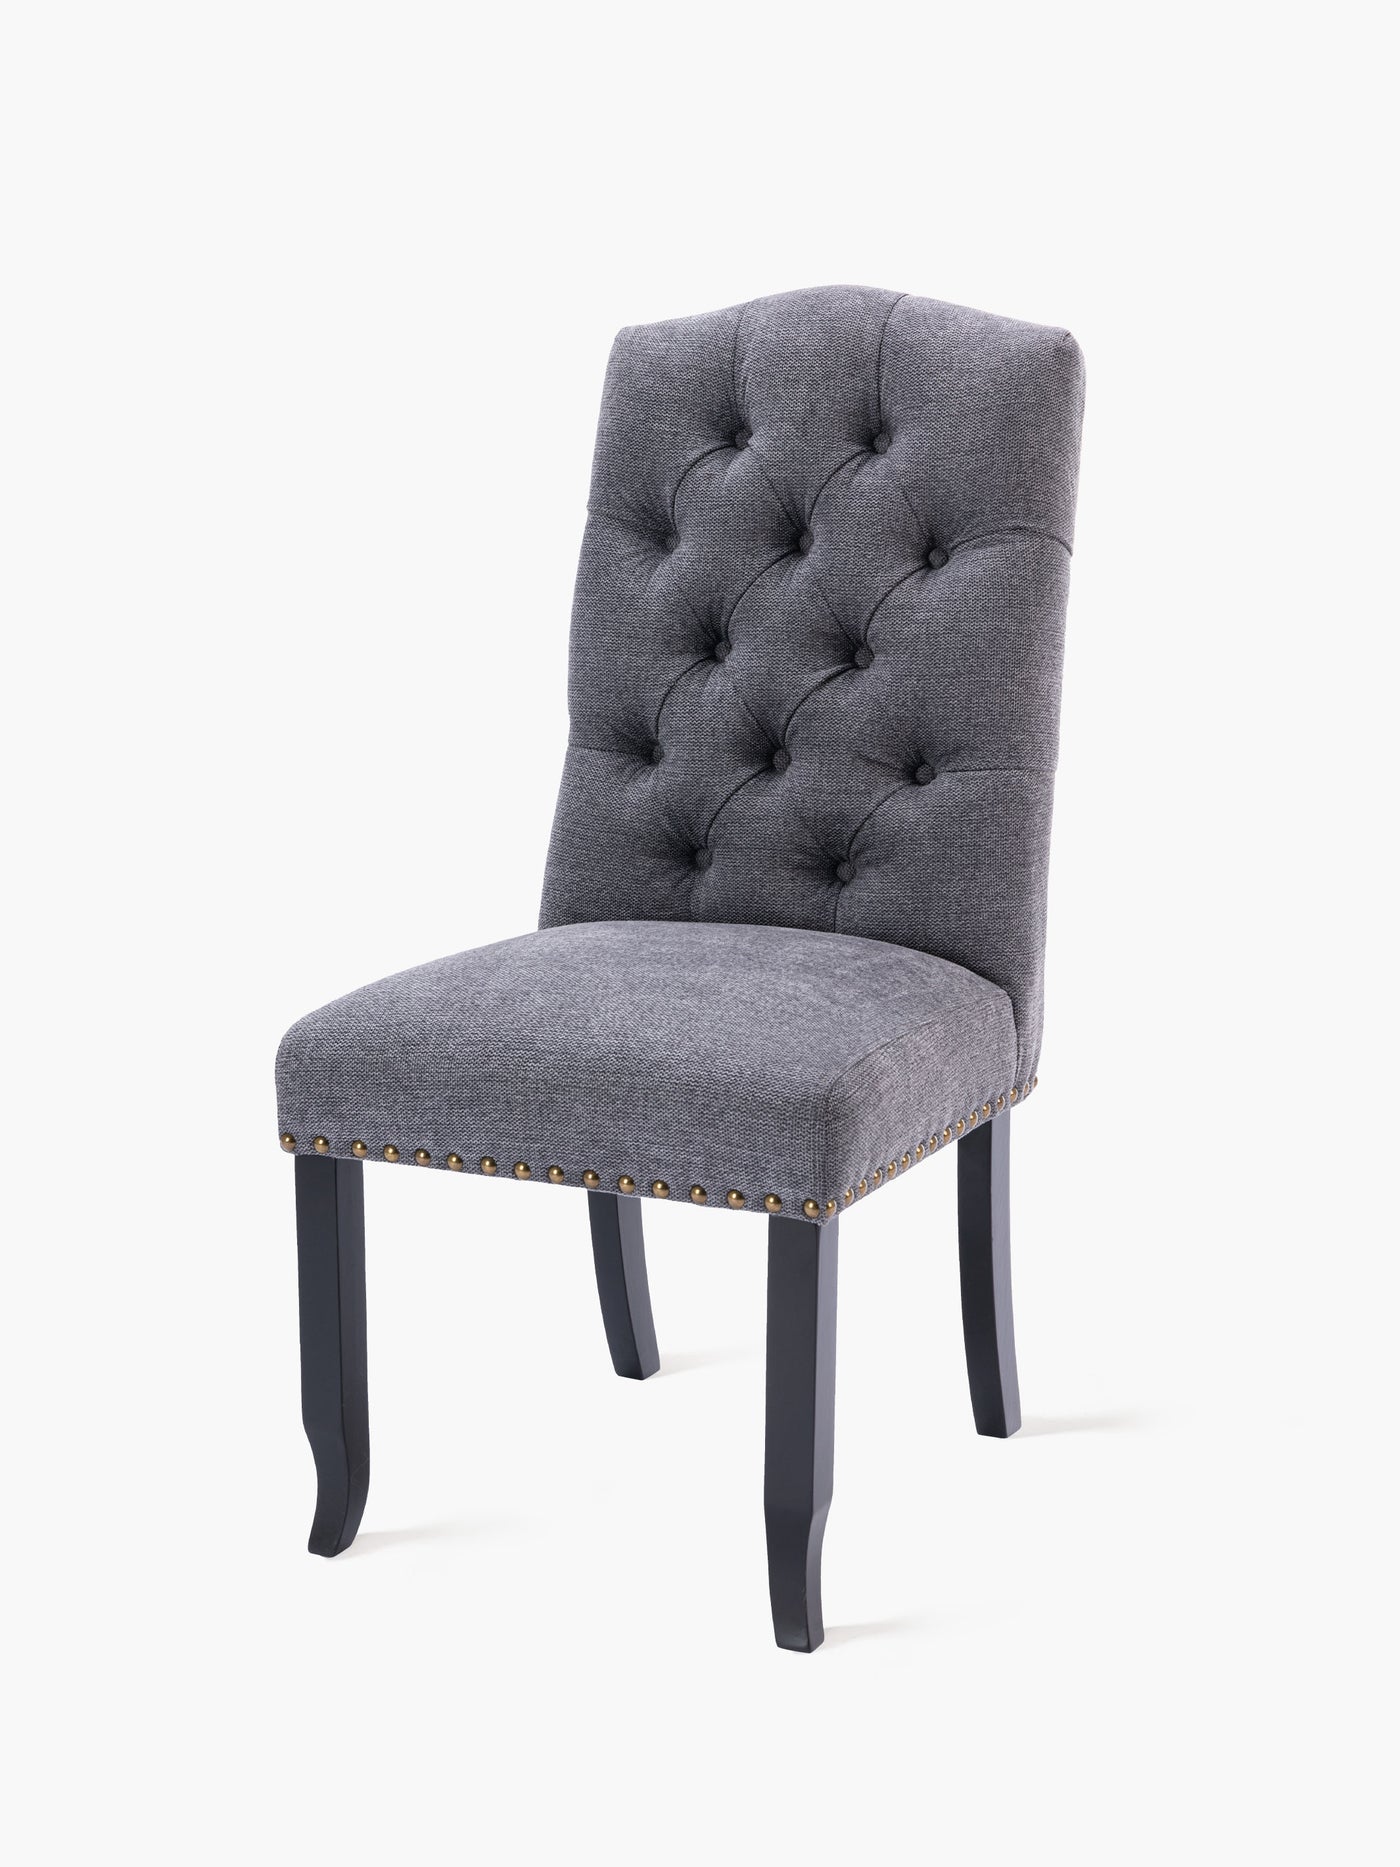 COLAMY Upholstered Fabric Dining Room Chair CL231 Gray #color_gray